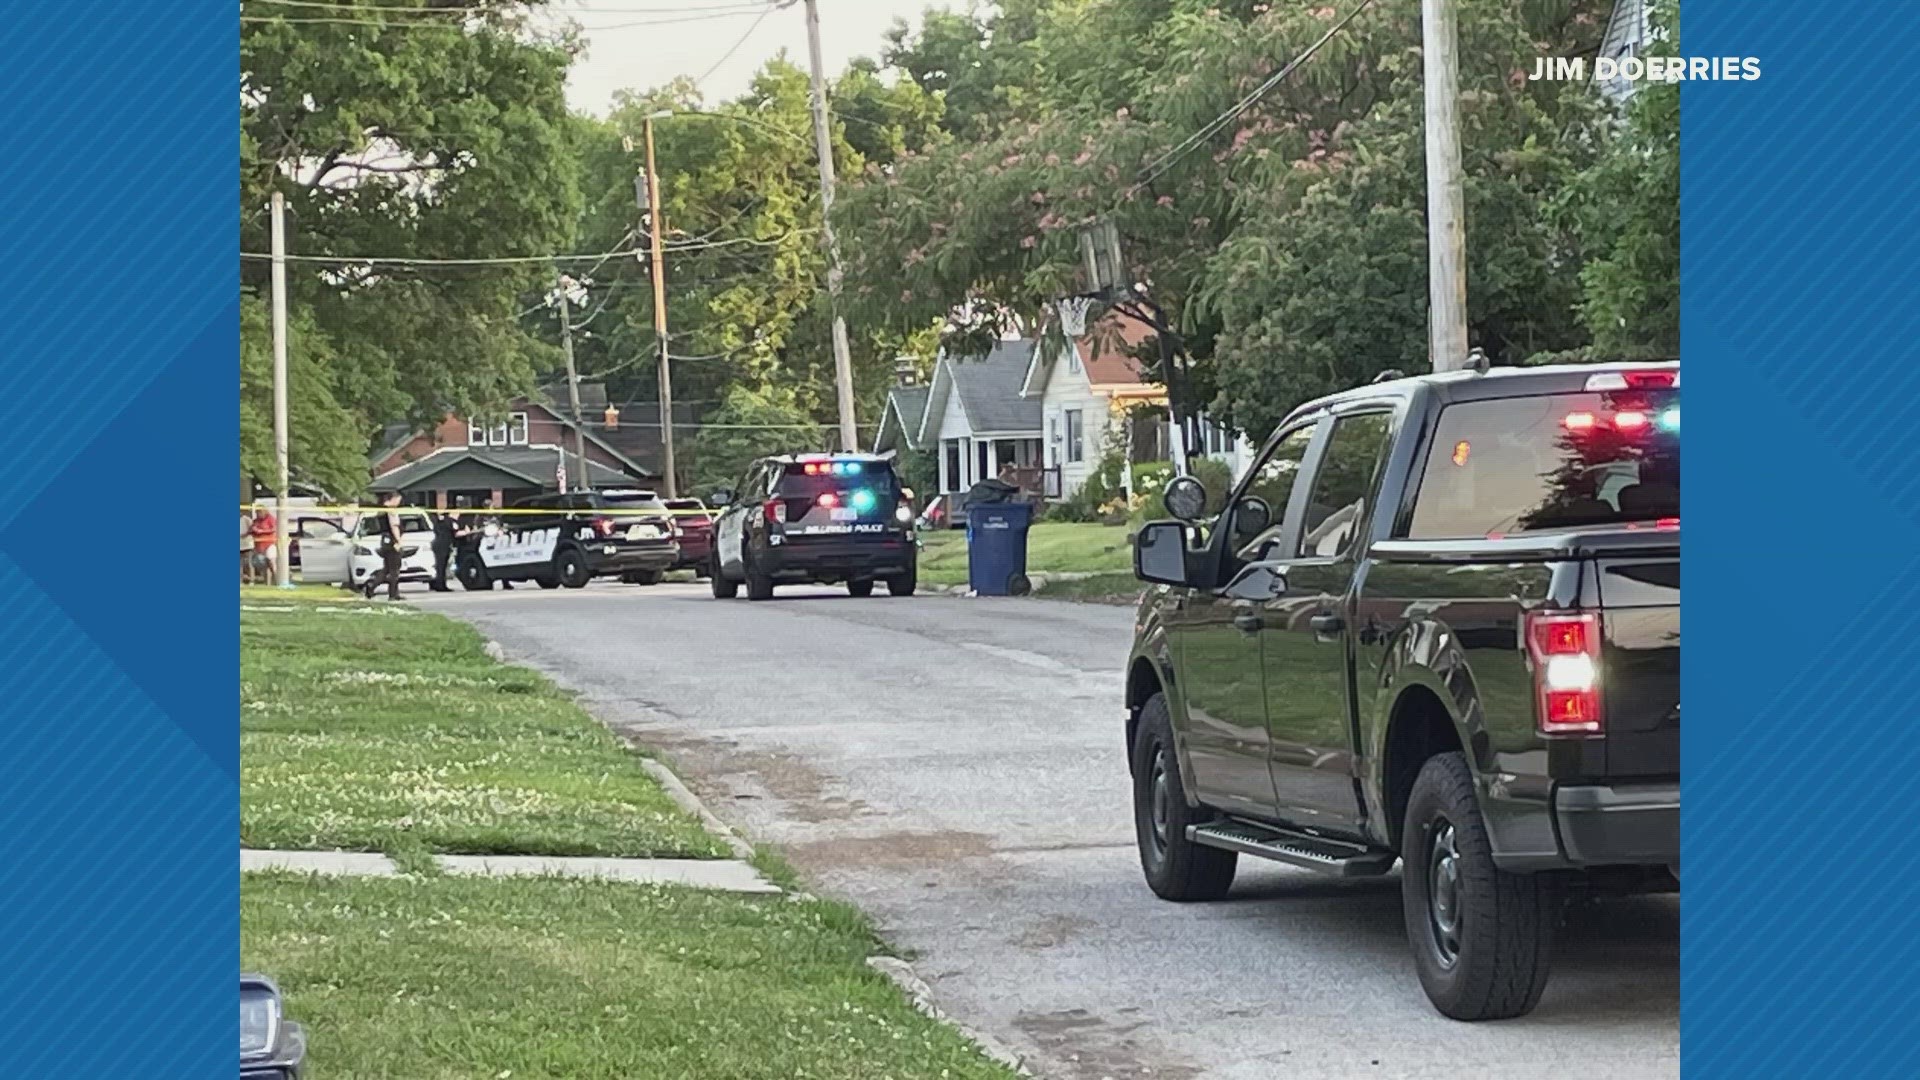 Police are investigating three separate shootings that occurred over the weekend in Belleville. Police don't believe the incidents are related.